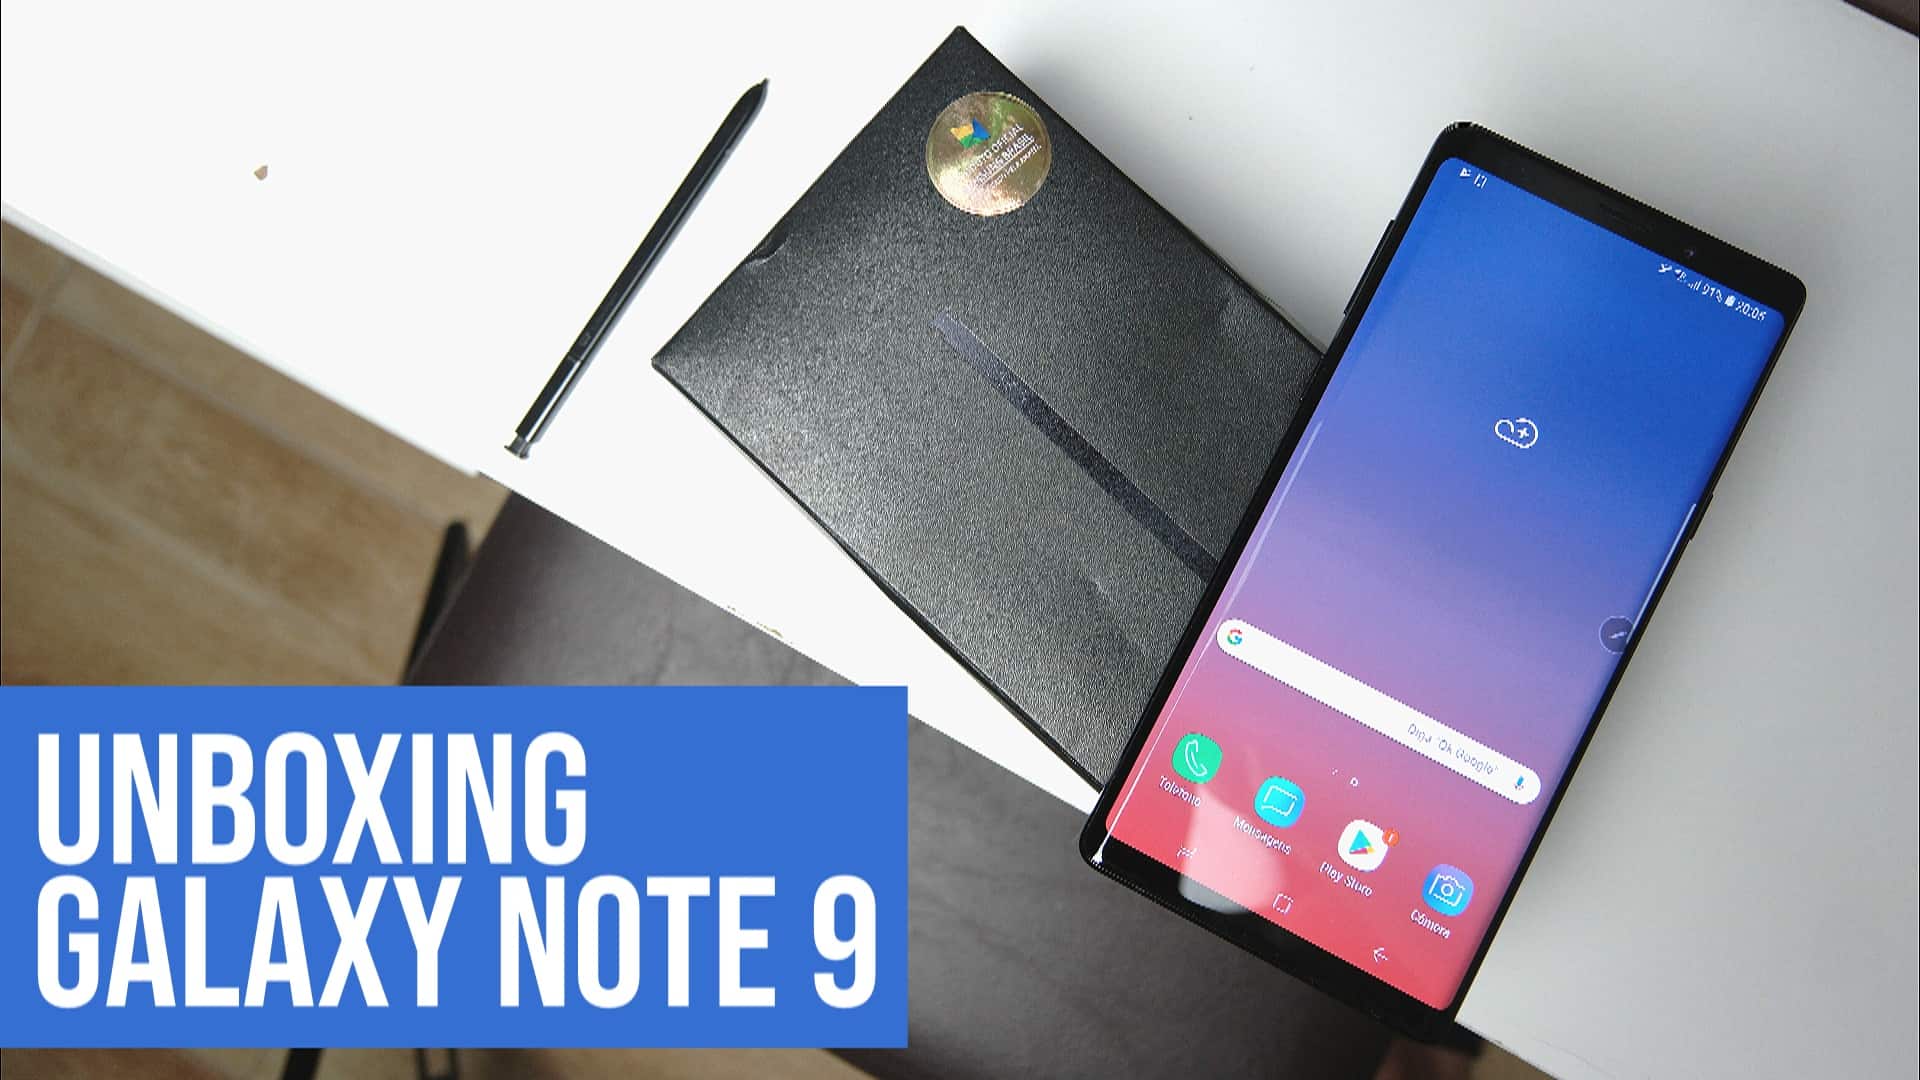 [Vídeo] Unboxing do Samsung Galaxy Note 9 1